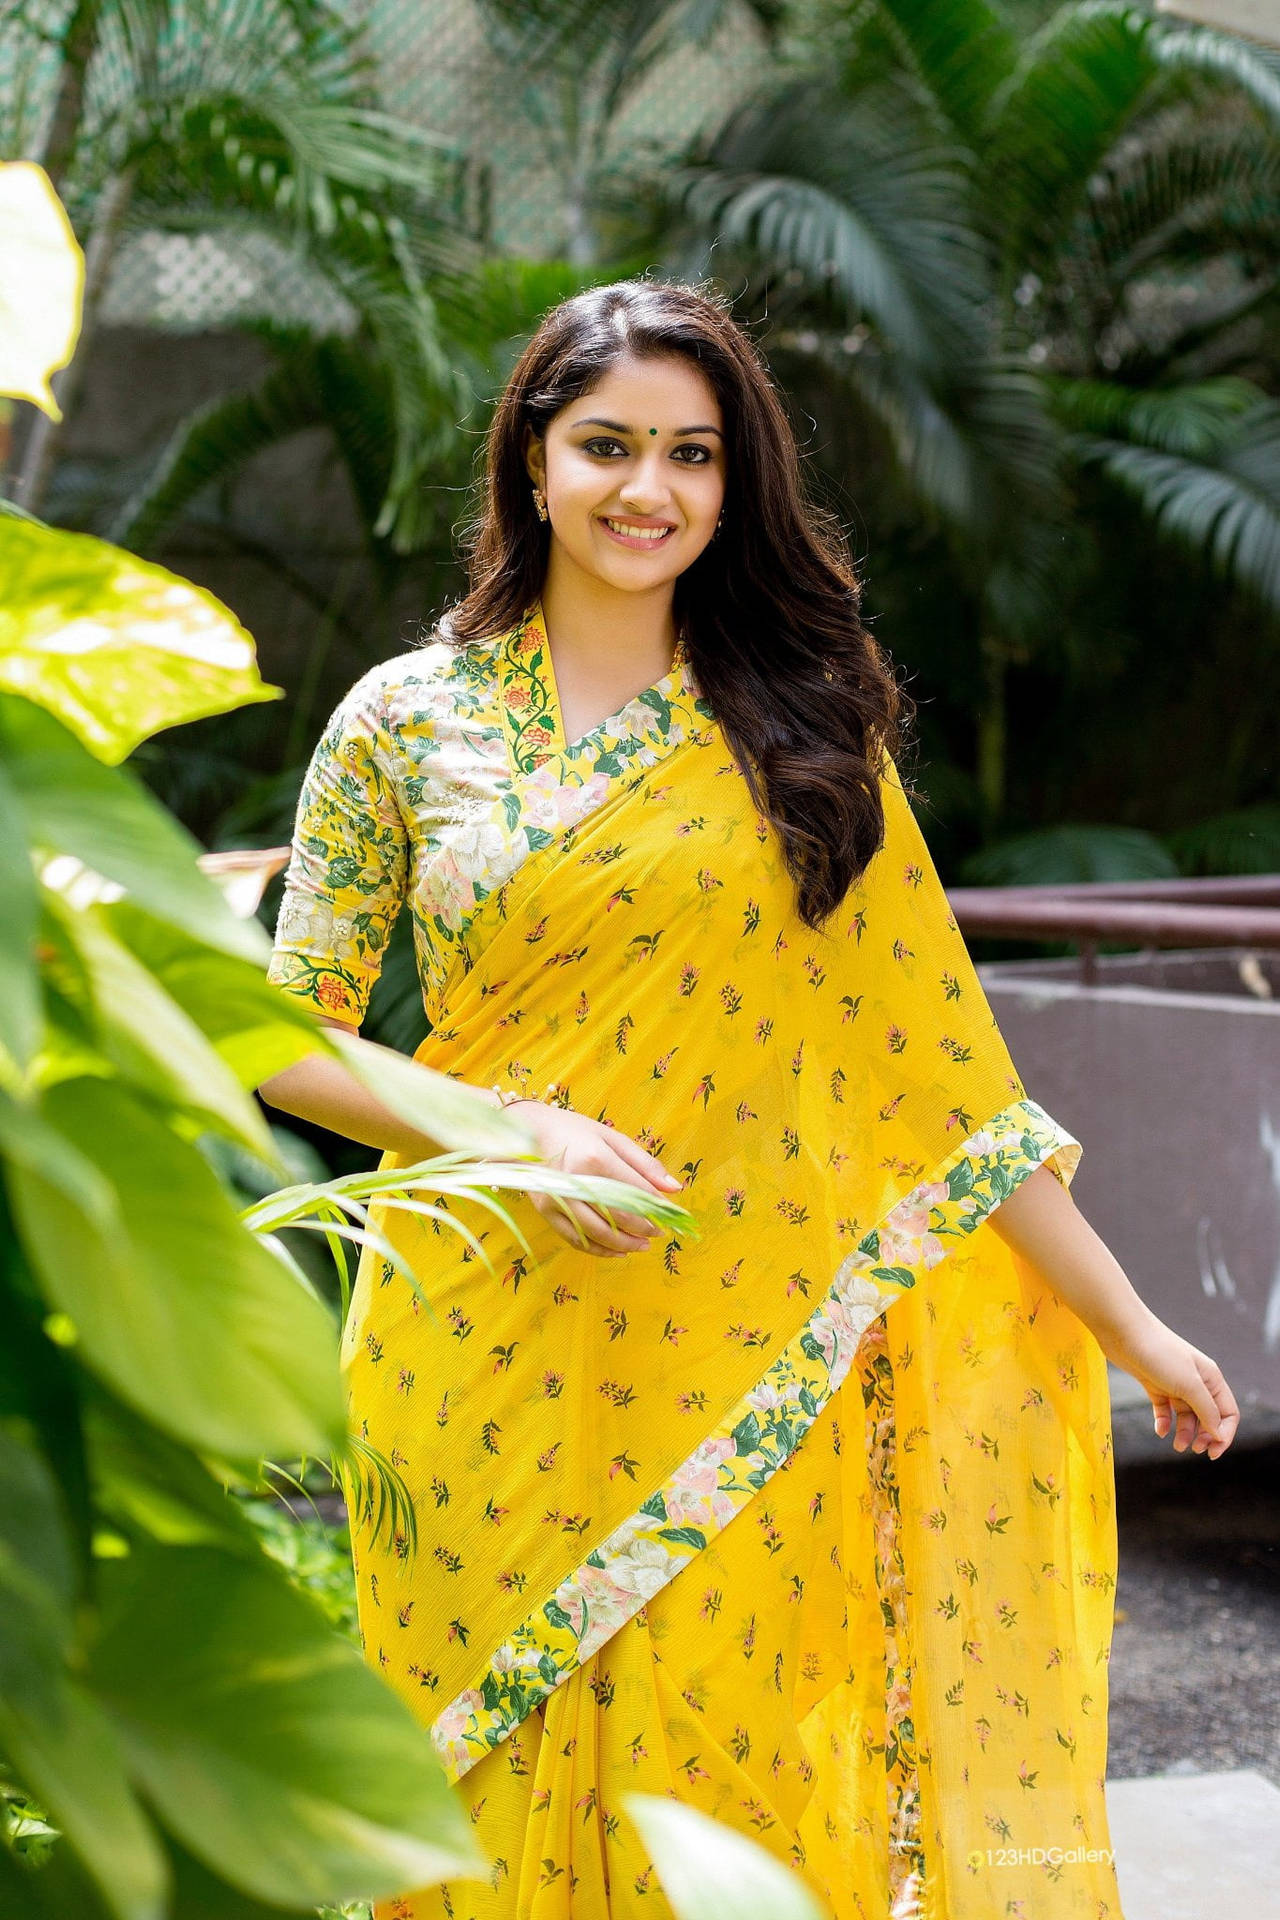 Captivating Keerthi Suresh In Yellow Floral Dress Background